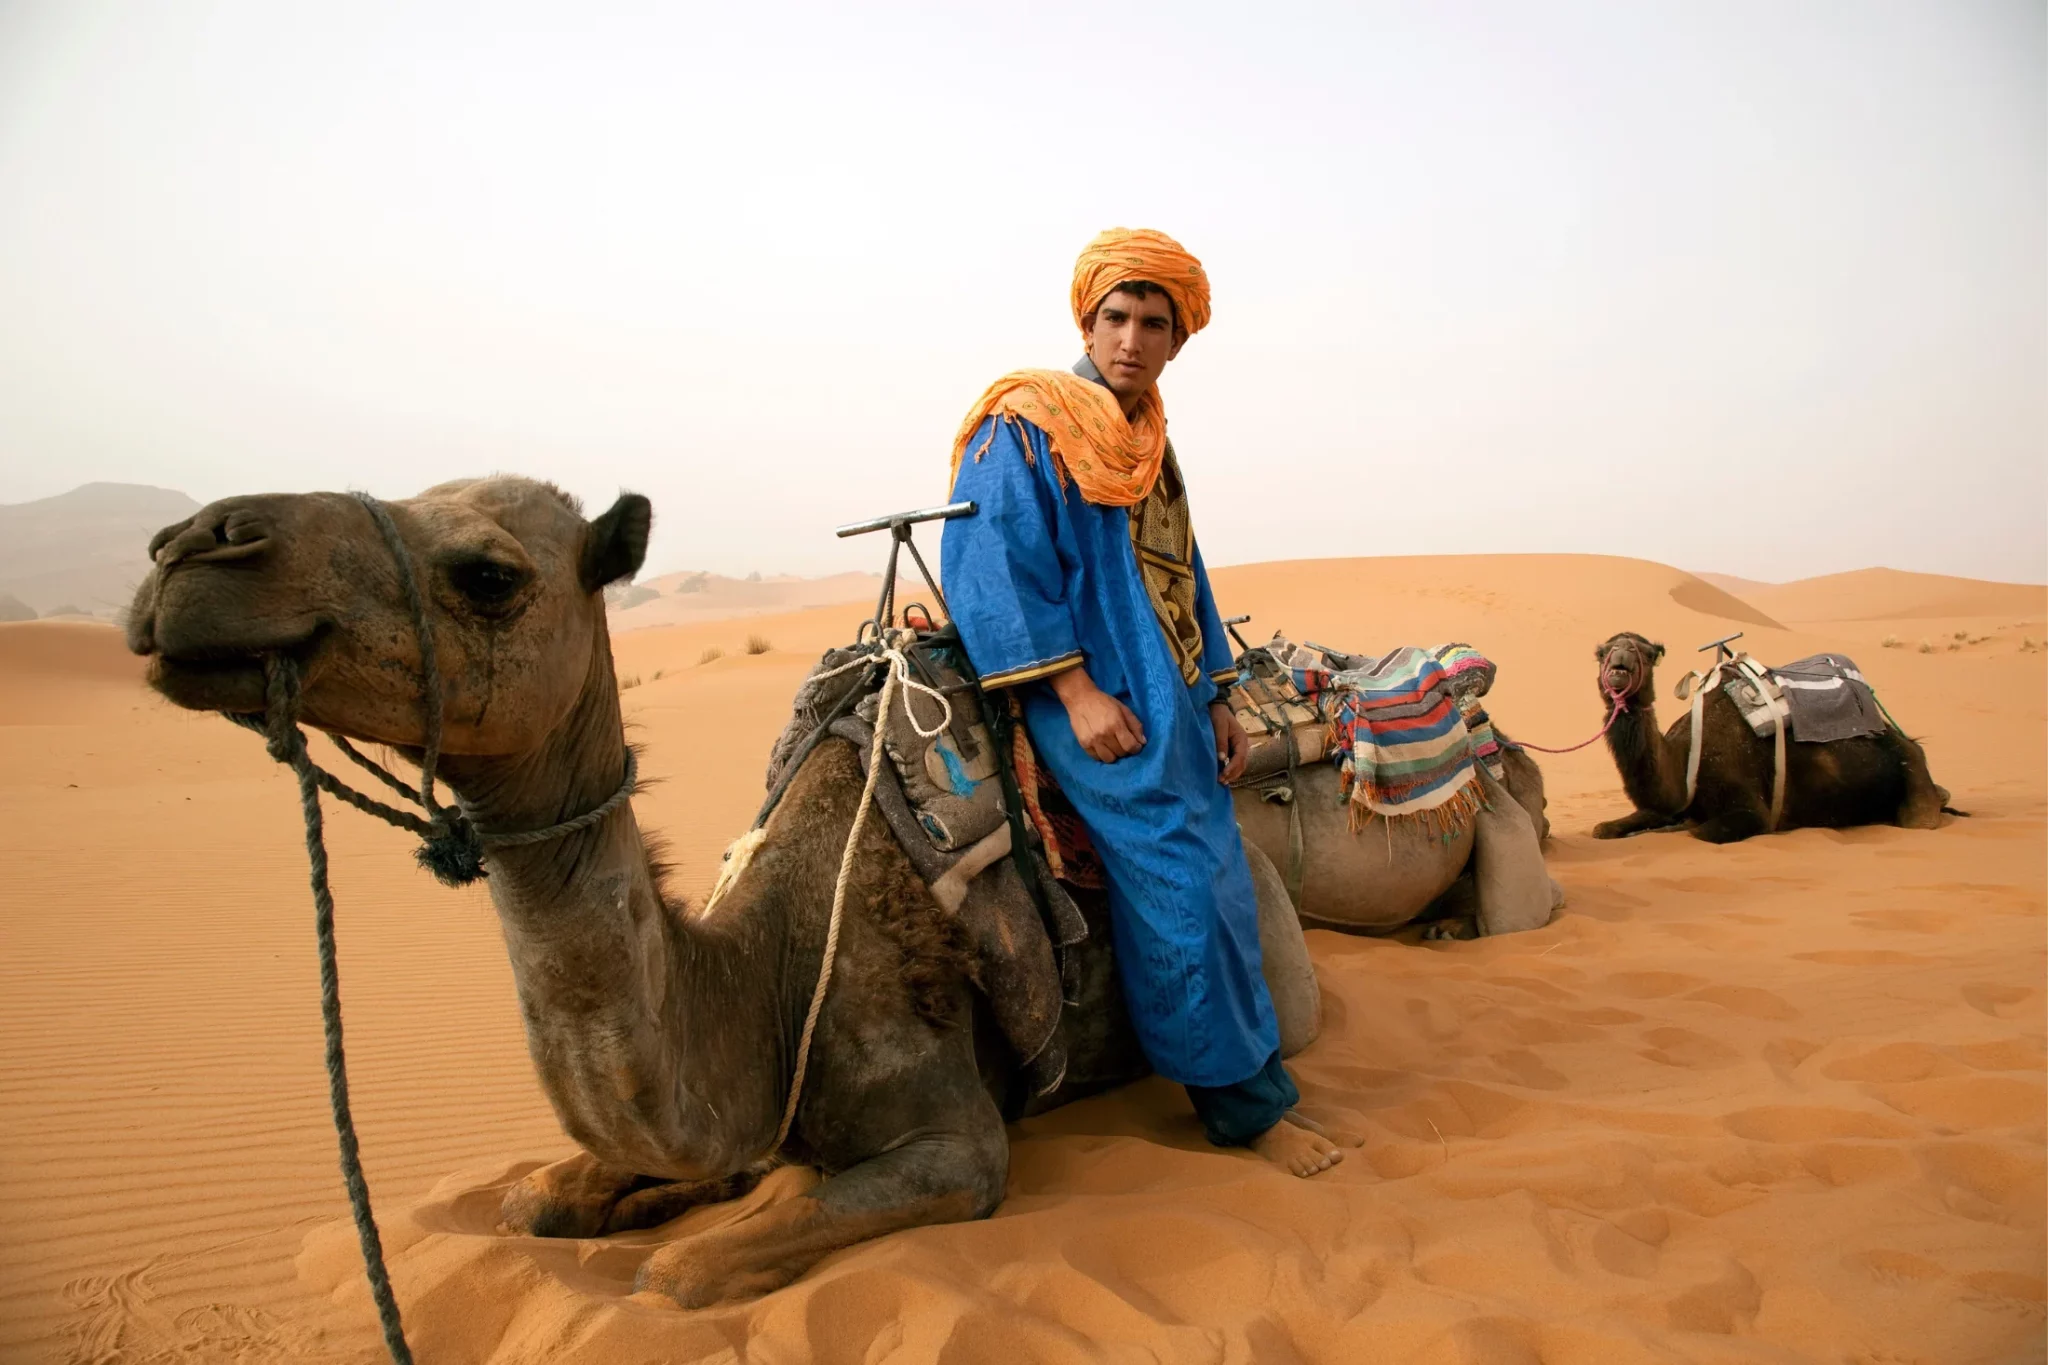 Bedouin and Camels in Sahara Desert, Morocco